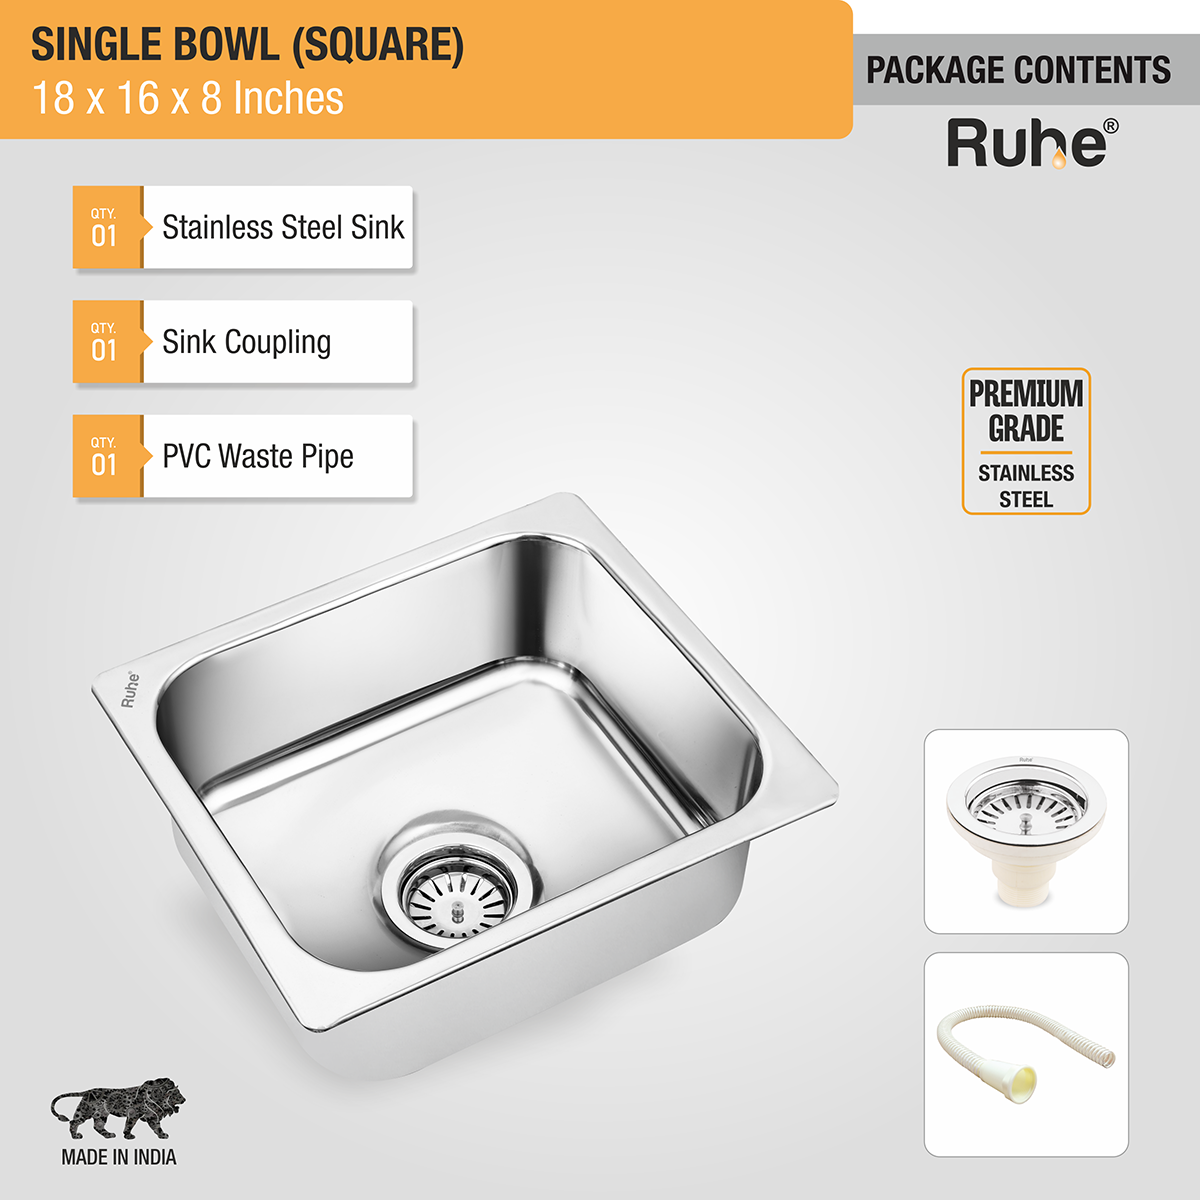 Square Single Bowl Kitchen Sink (18 x 16 x 8 inches) package content with sink coupling and pvc waste pipe